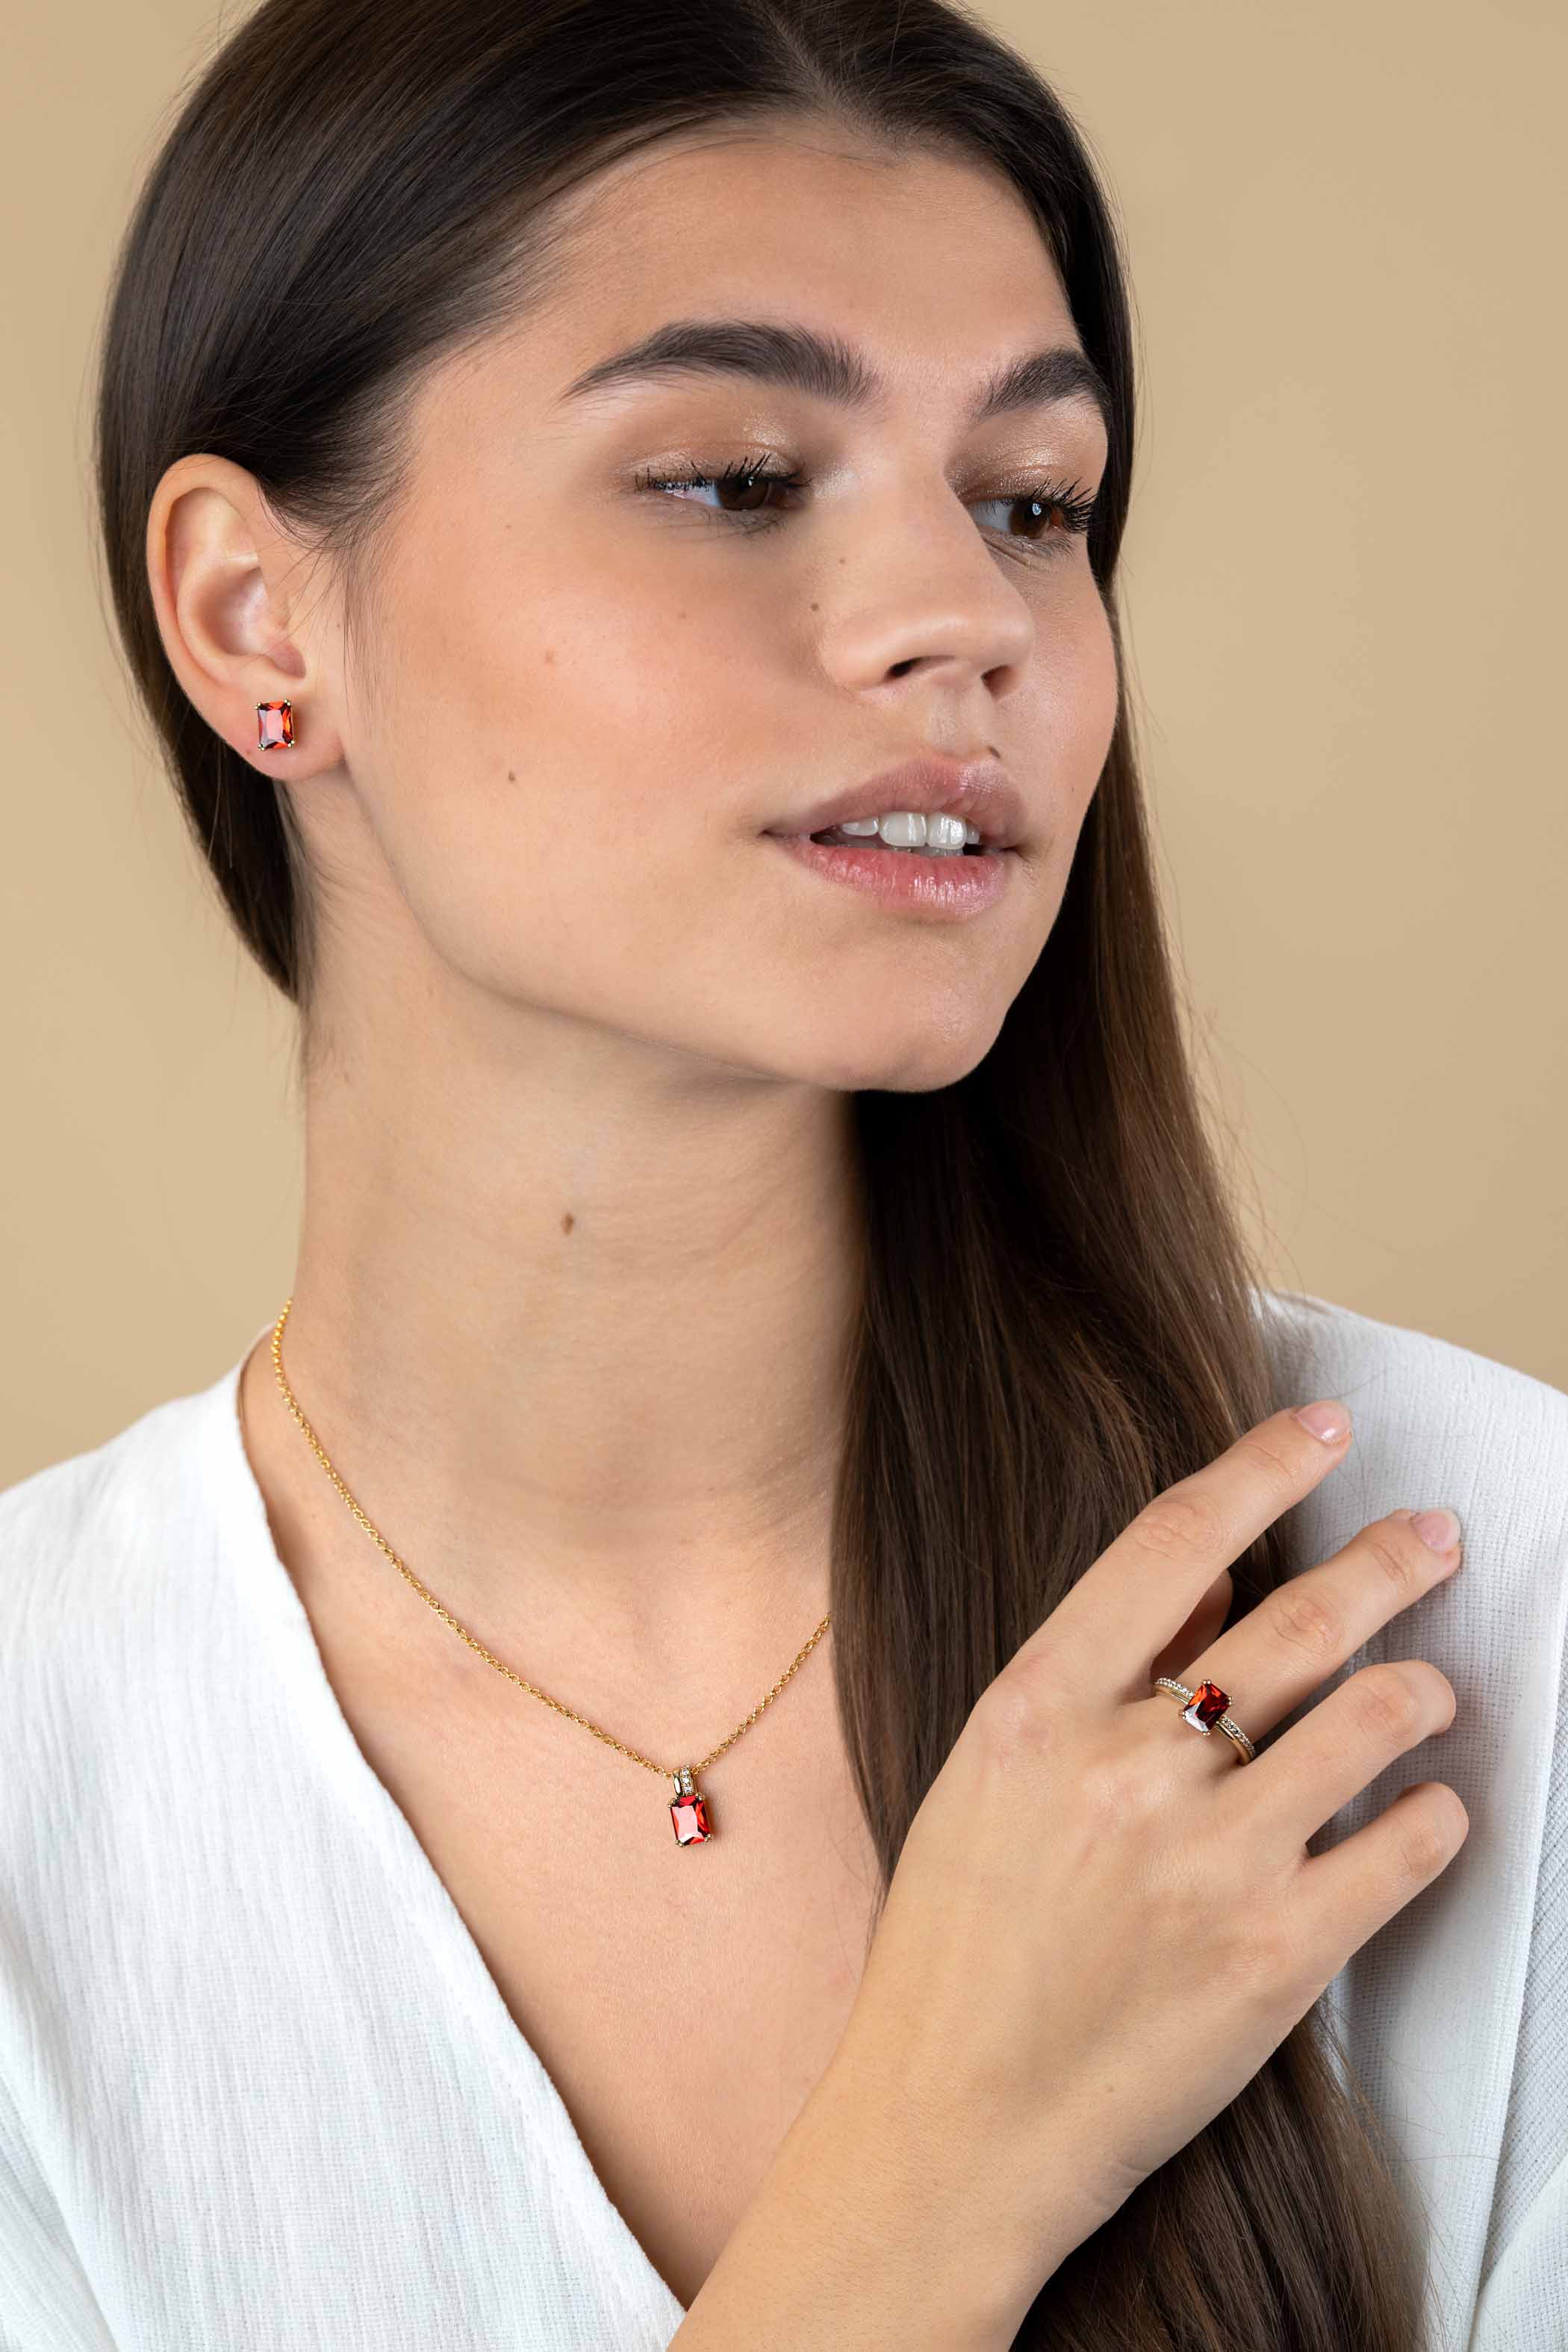 14mm ZINZI Sterling Silver Pendant Rectangular Red Garnet Color Stone and Luxurious Bail ZIH2392R (excl. necklace)